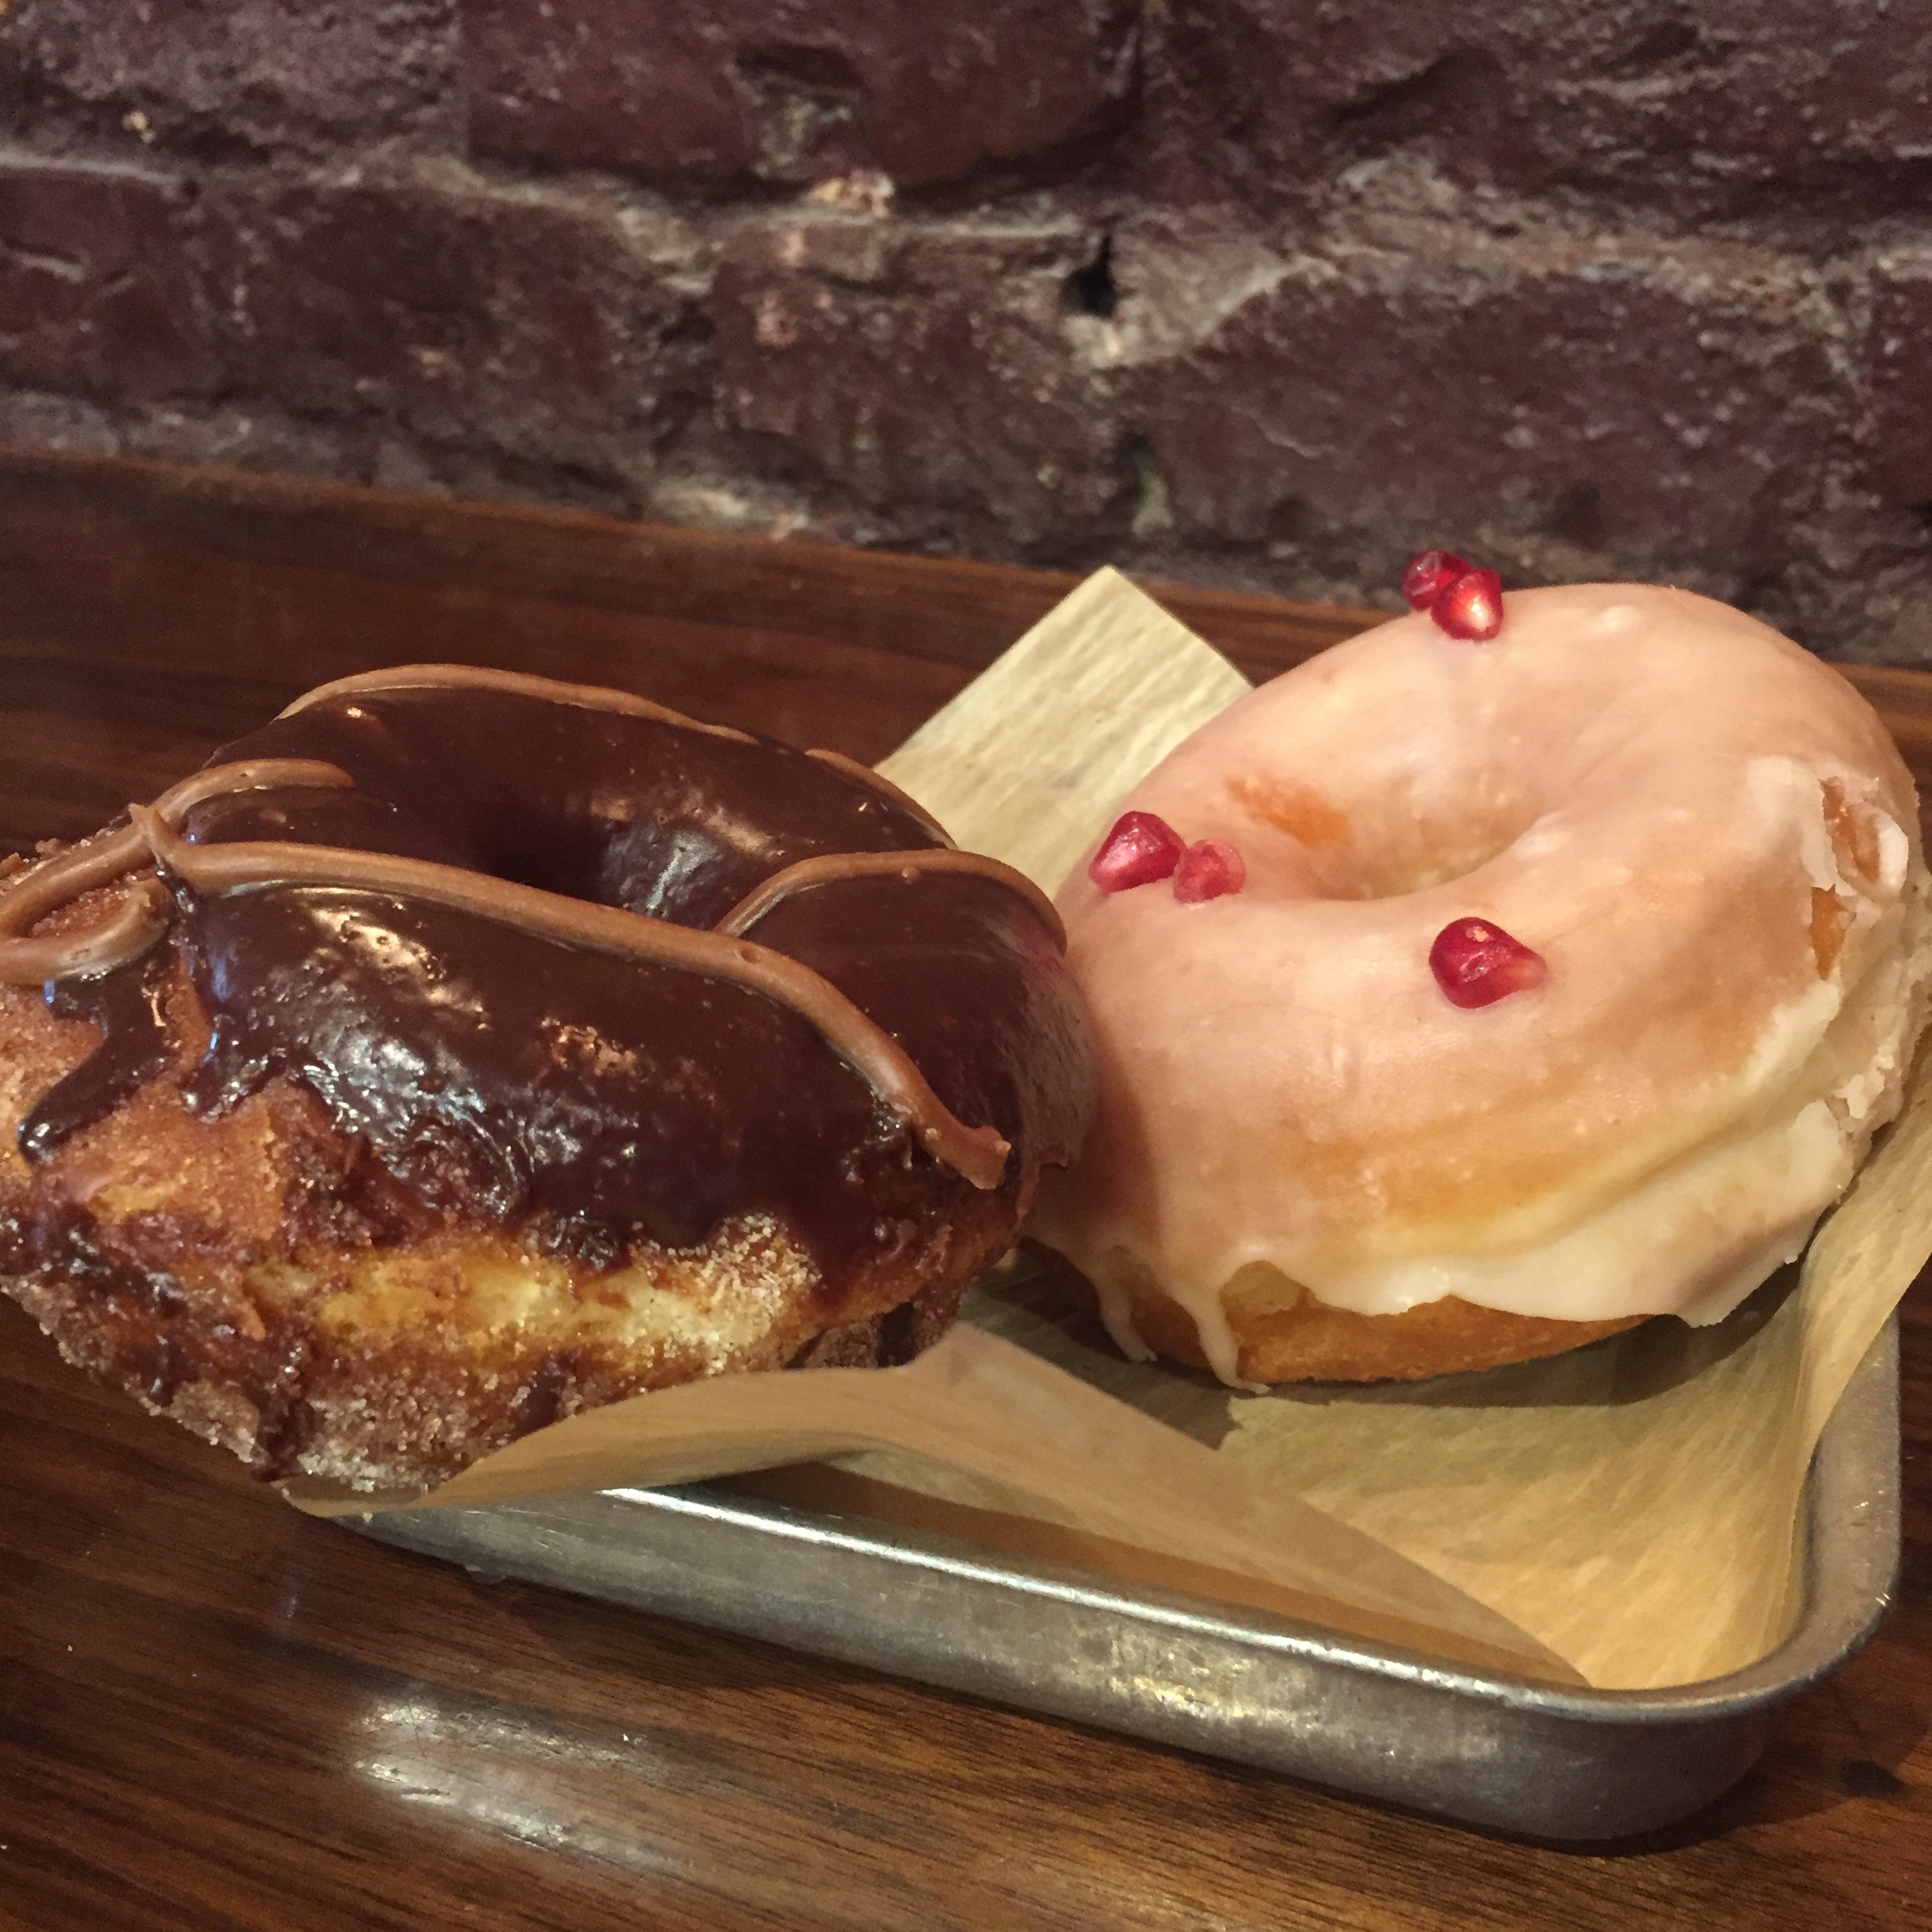 Mexican chocolate and pomegranate donuts from District Donuts in New Orleans, Louisiana